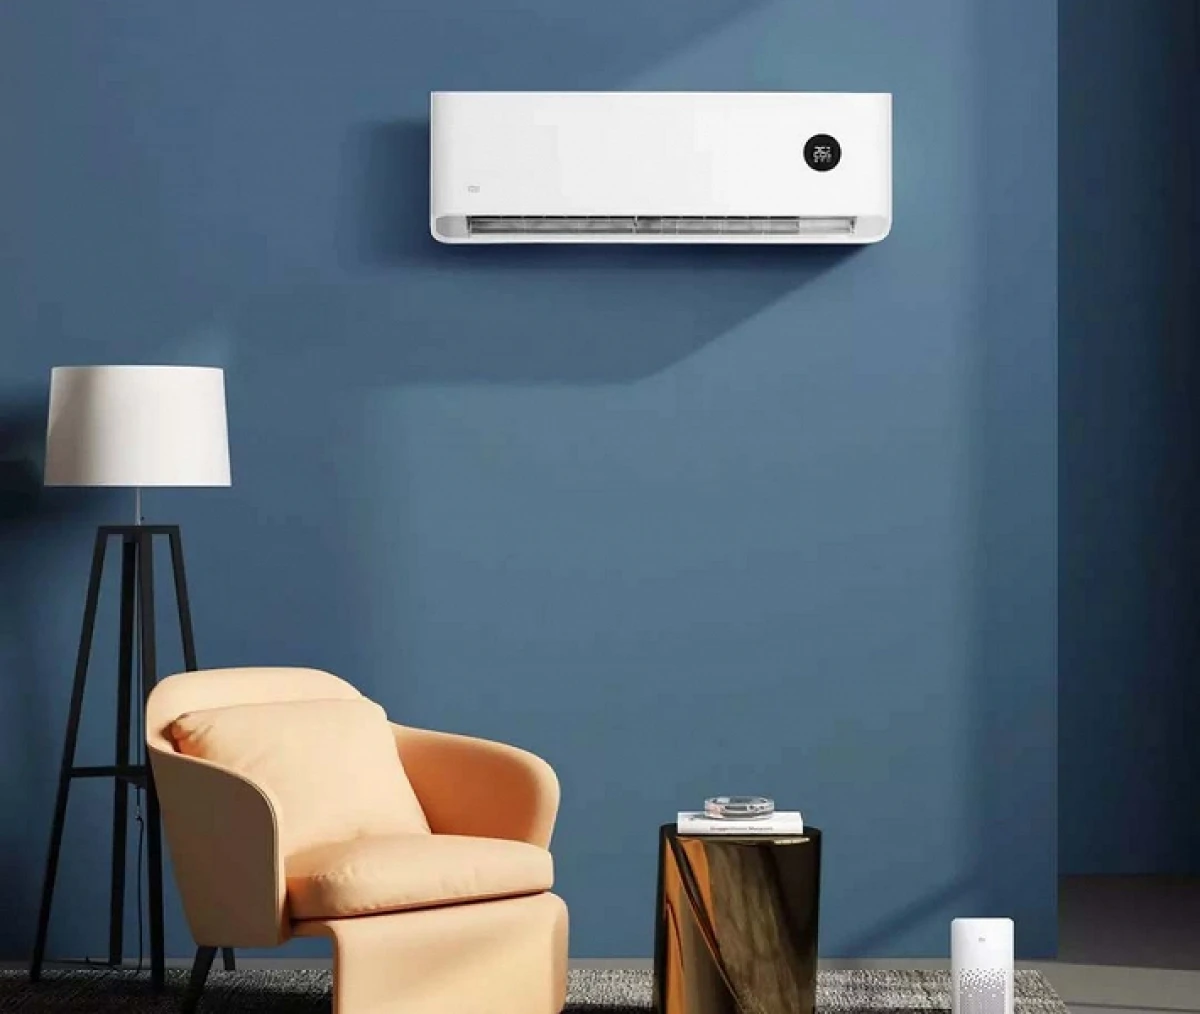 Xiaomi Air Conditioner Launched With Heating And Cooling Features, You Will Be Shocked To Know The Price